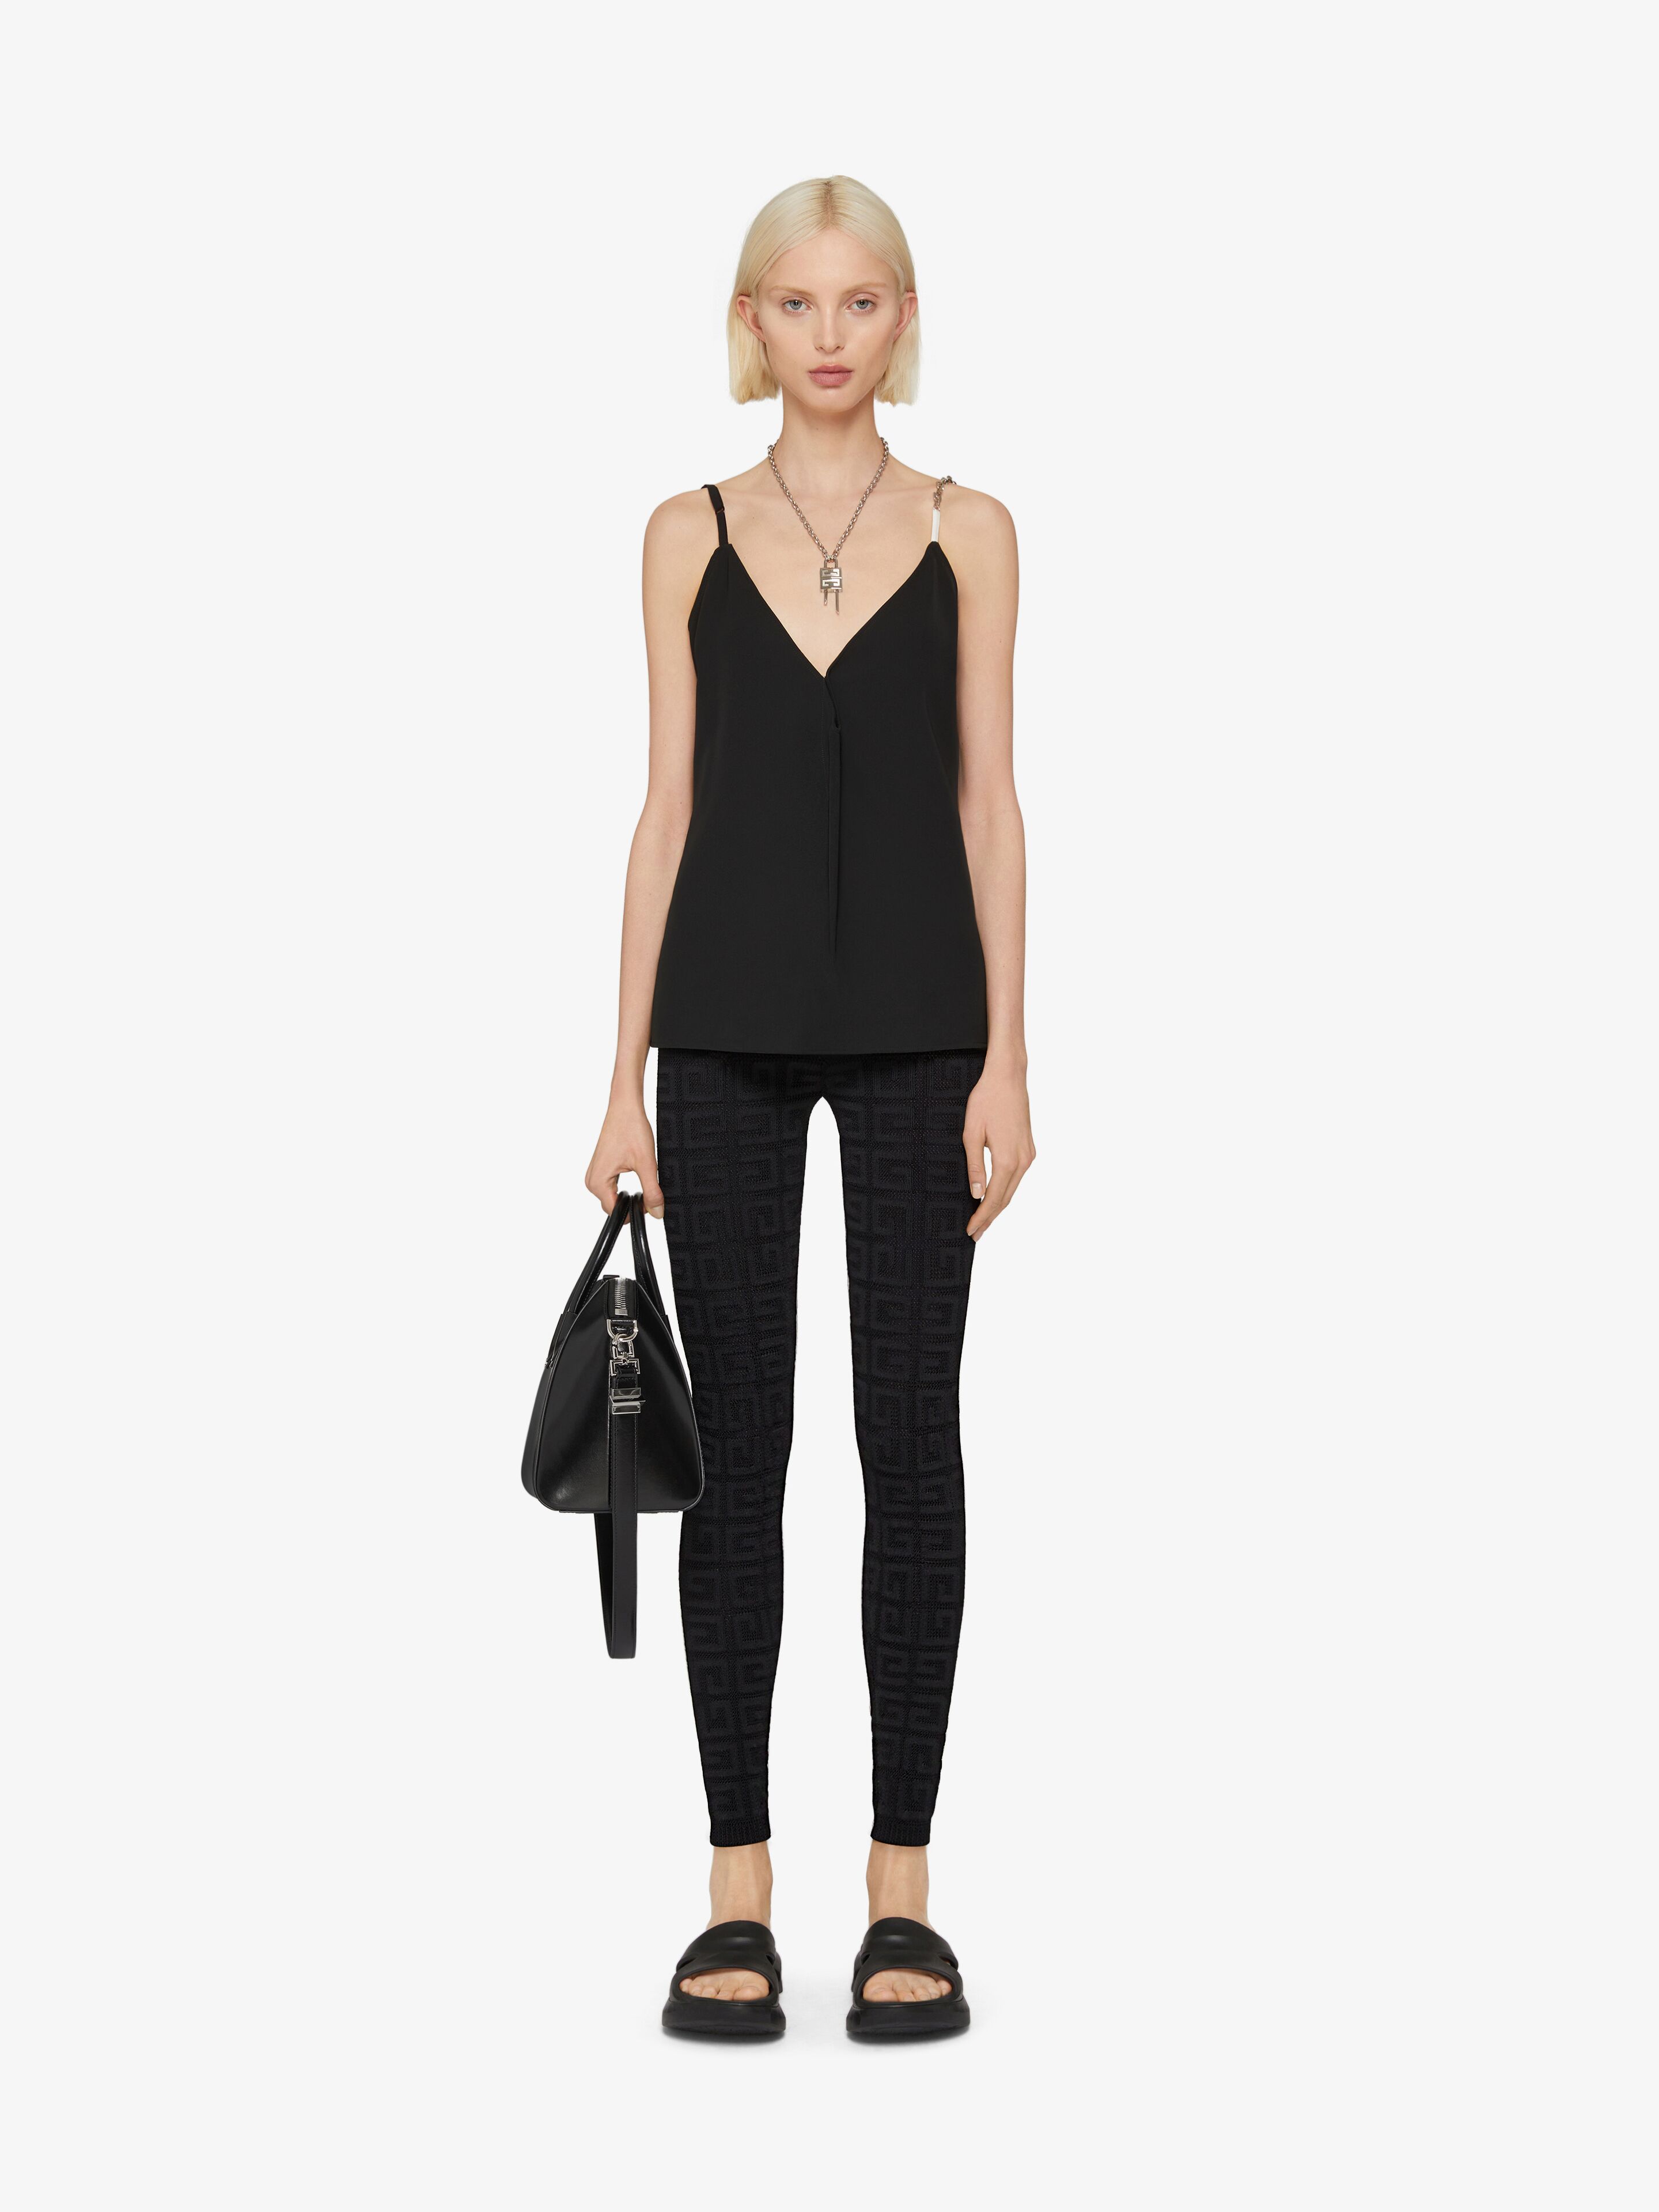 Leggings in 4G jacquard, Givenchy US